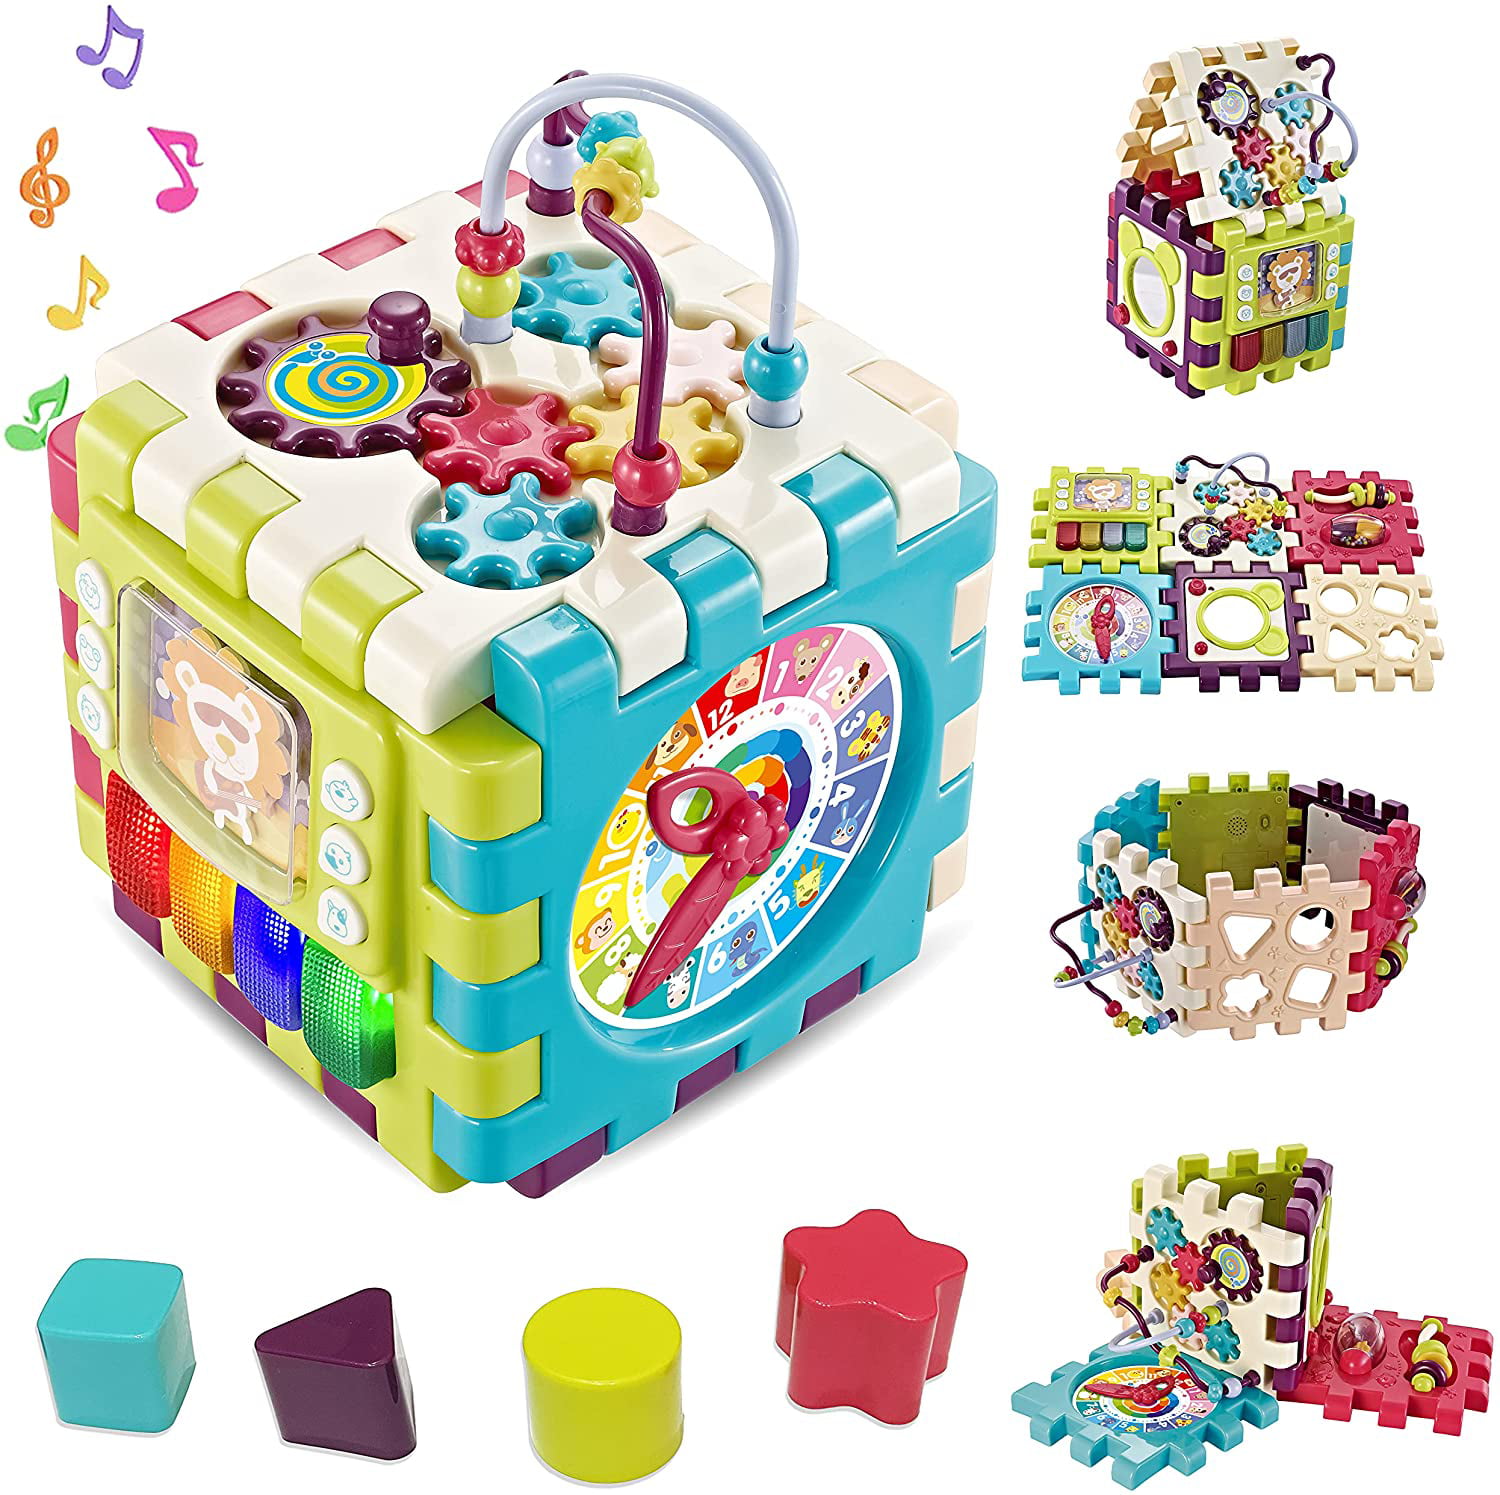 deAO 7-in-1 Educational Cube with Shapes Sorting & Music for Babies & Toddlers 